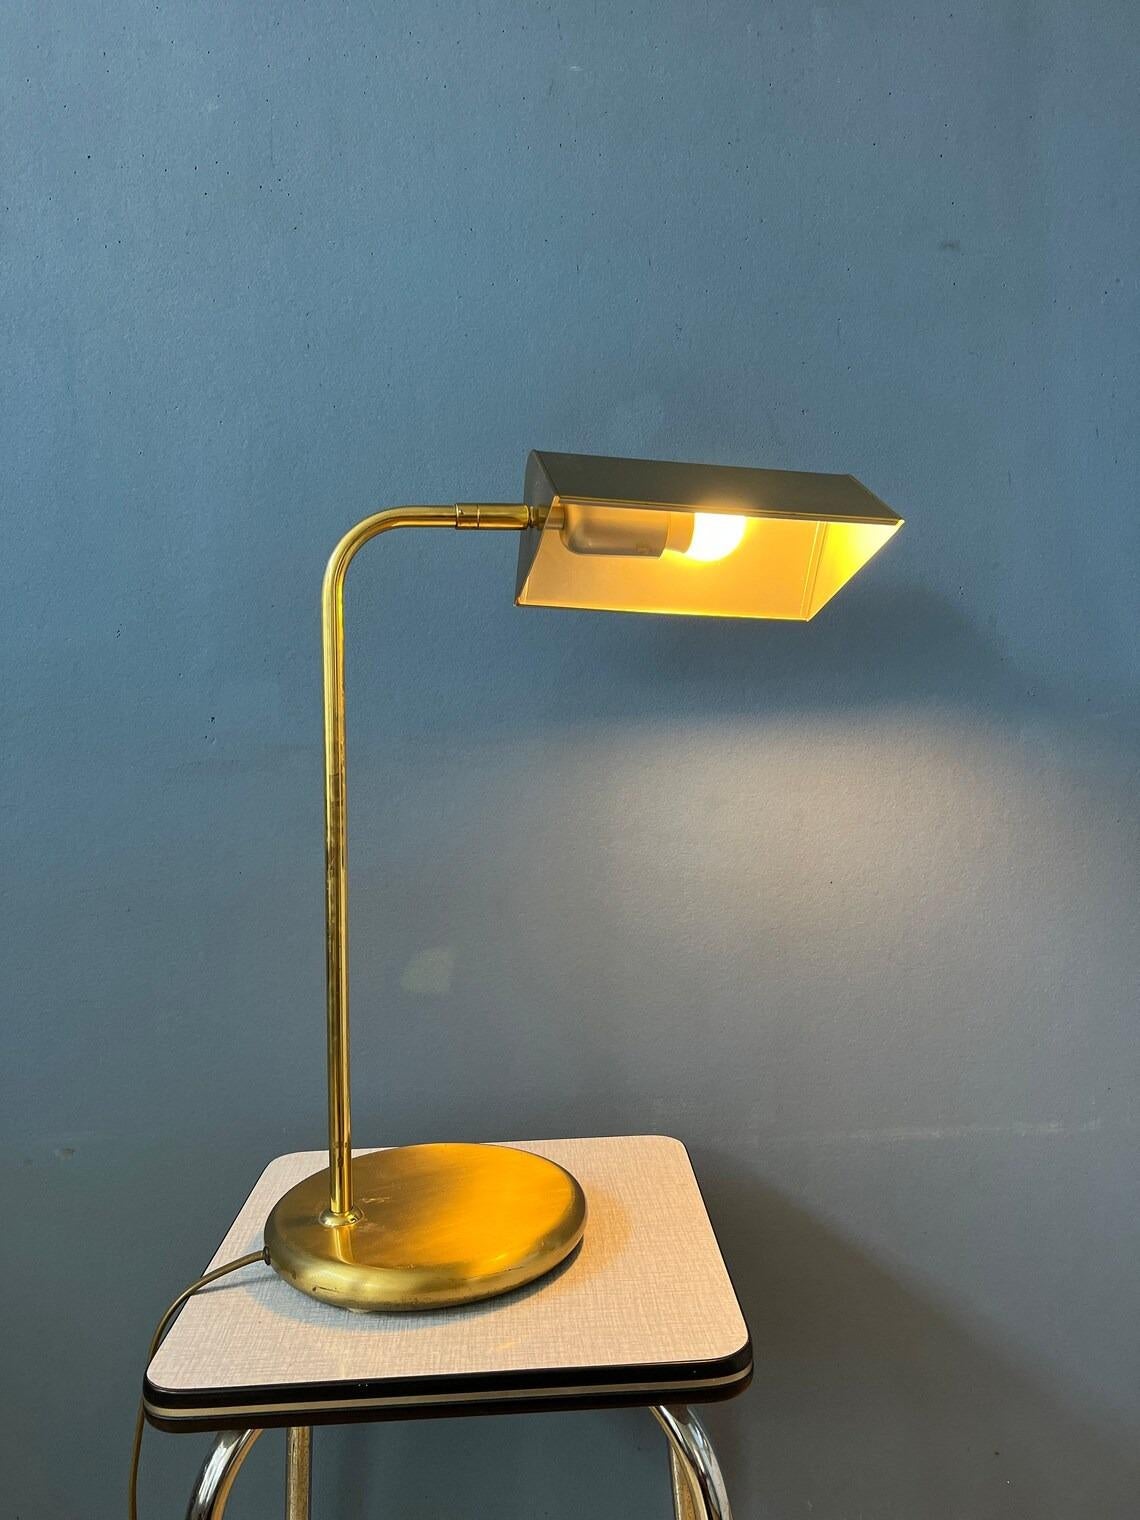 Vintage brass desk lamp with adjustable shade. The shade can easily turned in different directions, see pictures. The lamp requires an E27 lightbulb and currently has an EU-plug.

Additional information:
Materials: Glass, metal, wood
Period: